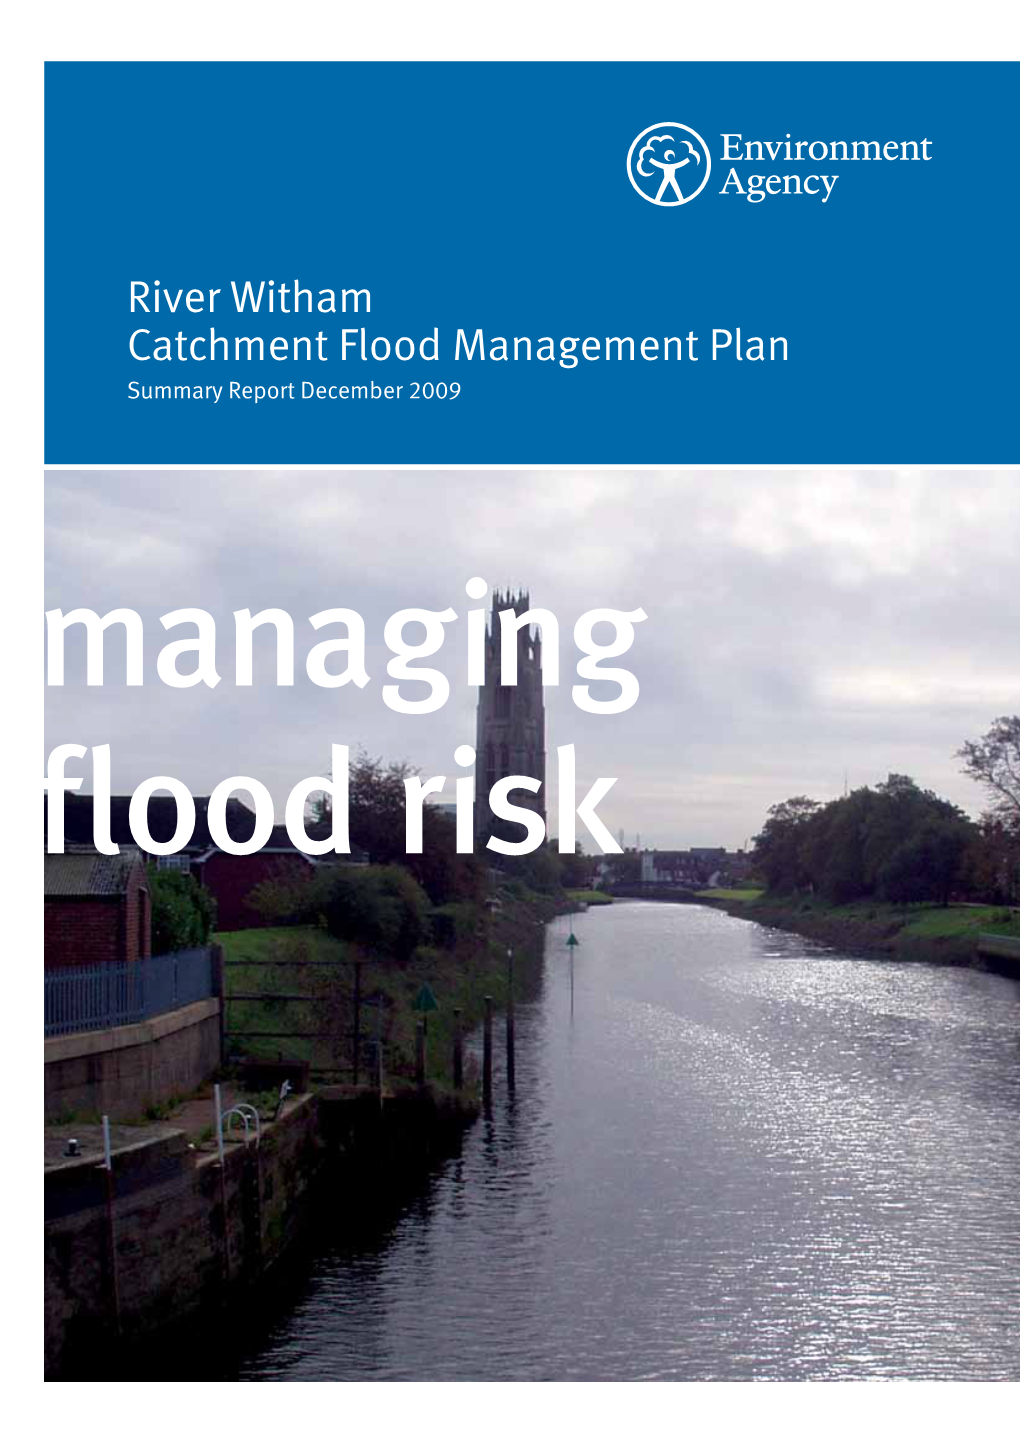 River Witham Catchment Flood Management Plan Summary Report December 2009 Managing Flood Risk We Are the Environment Agency